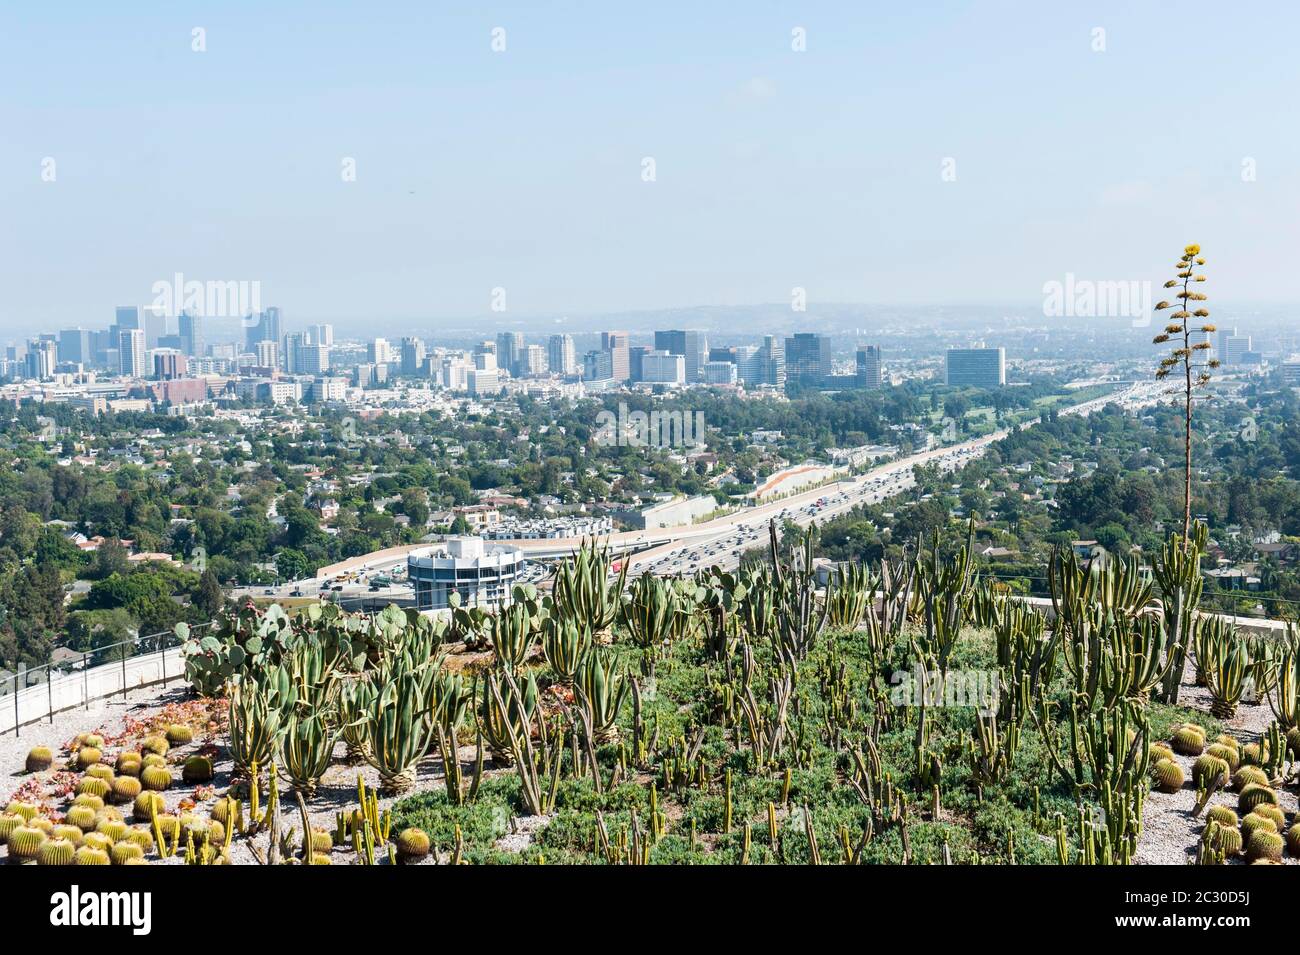 View of cactus garden and downtown from the Getty Center in Brentwood, J. Paul Getty Museum, Los Angeles, Los Angeles, California, USA Stock Photo